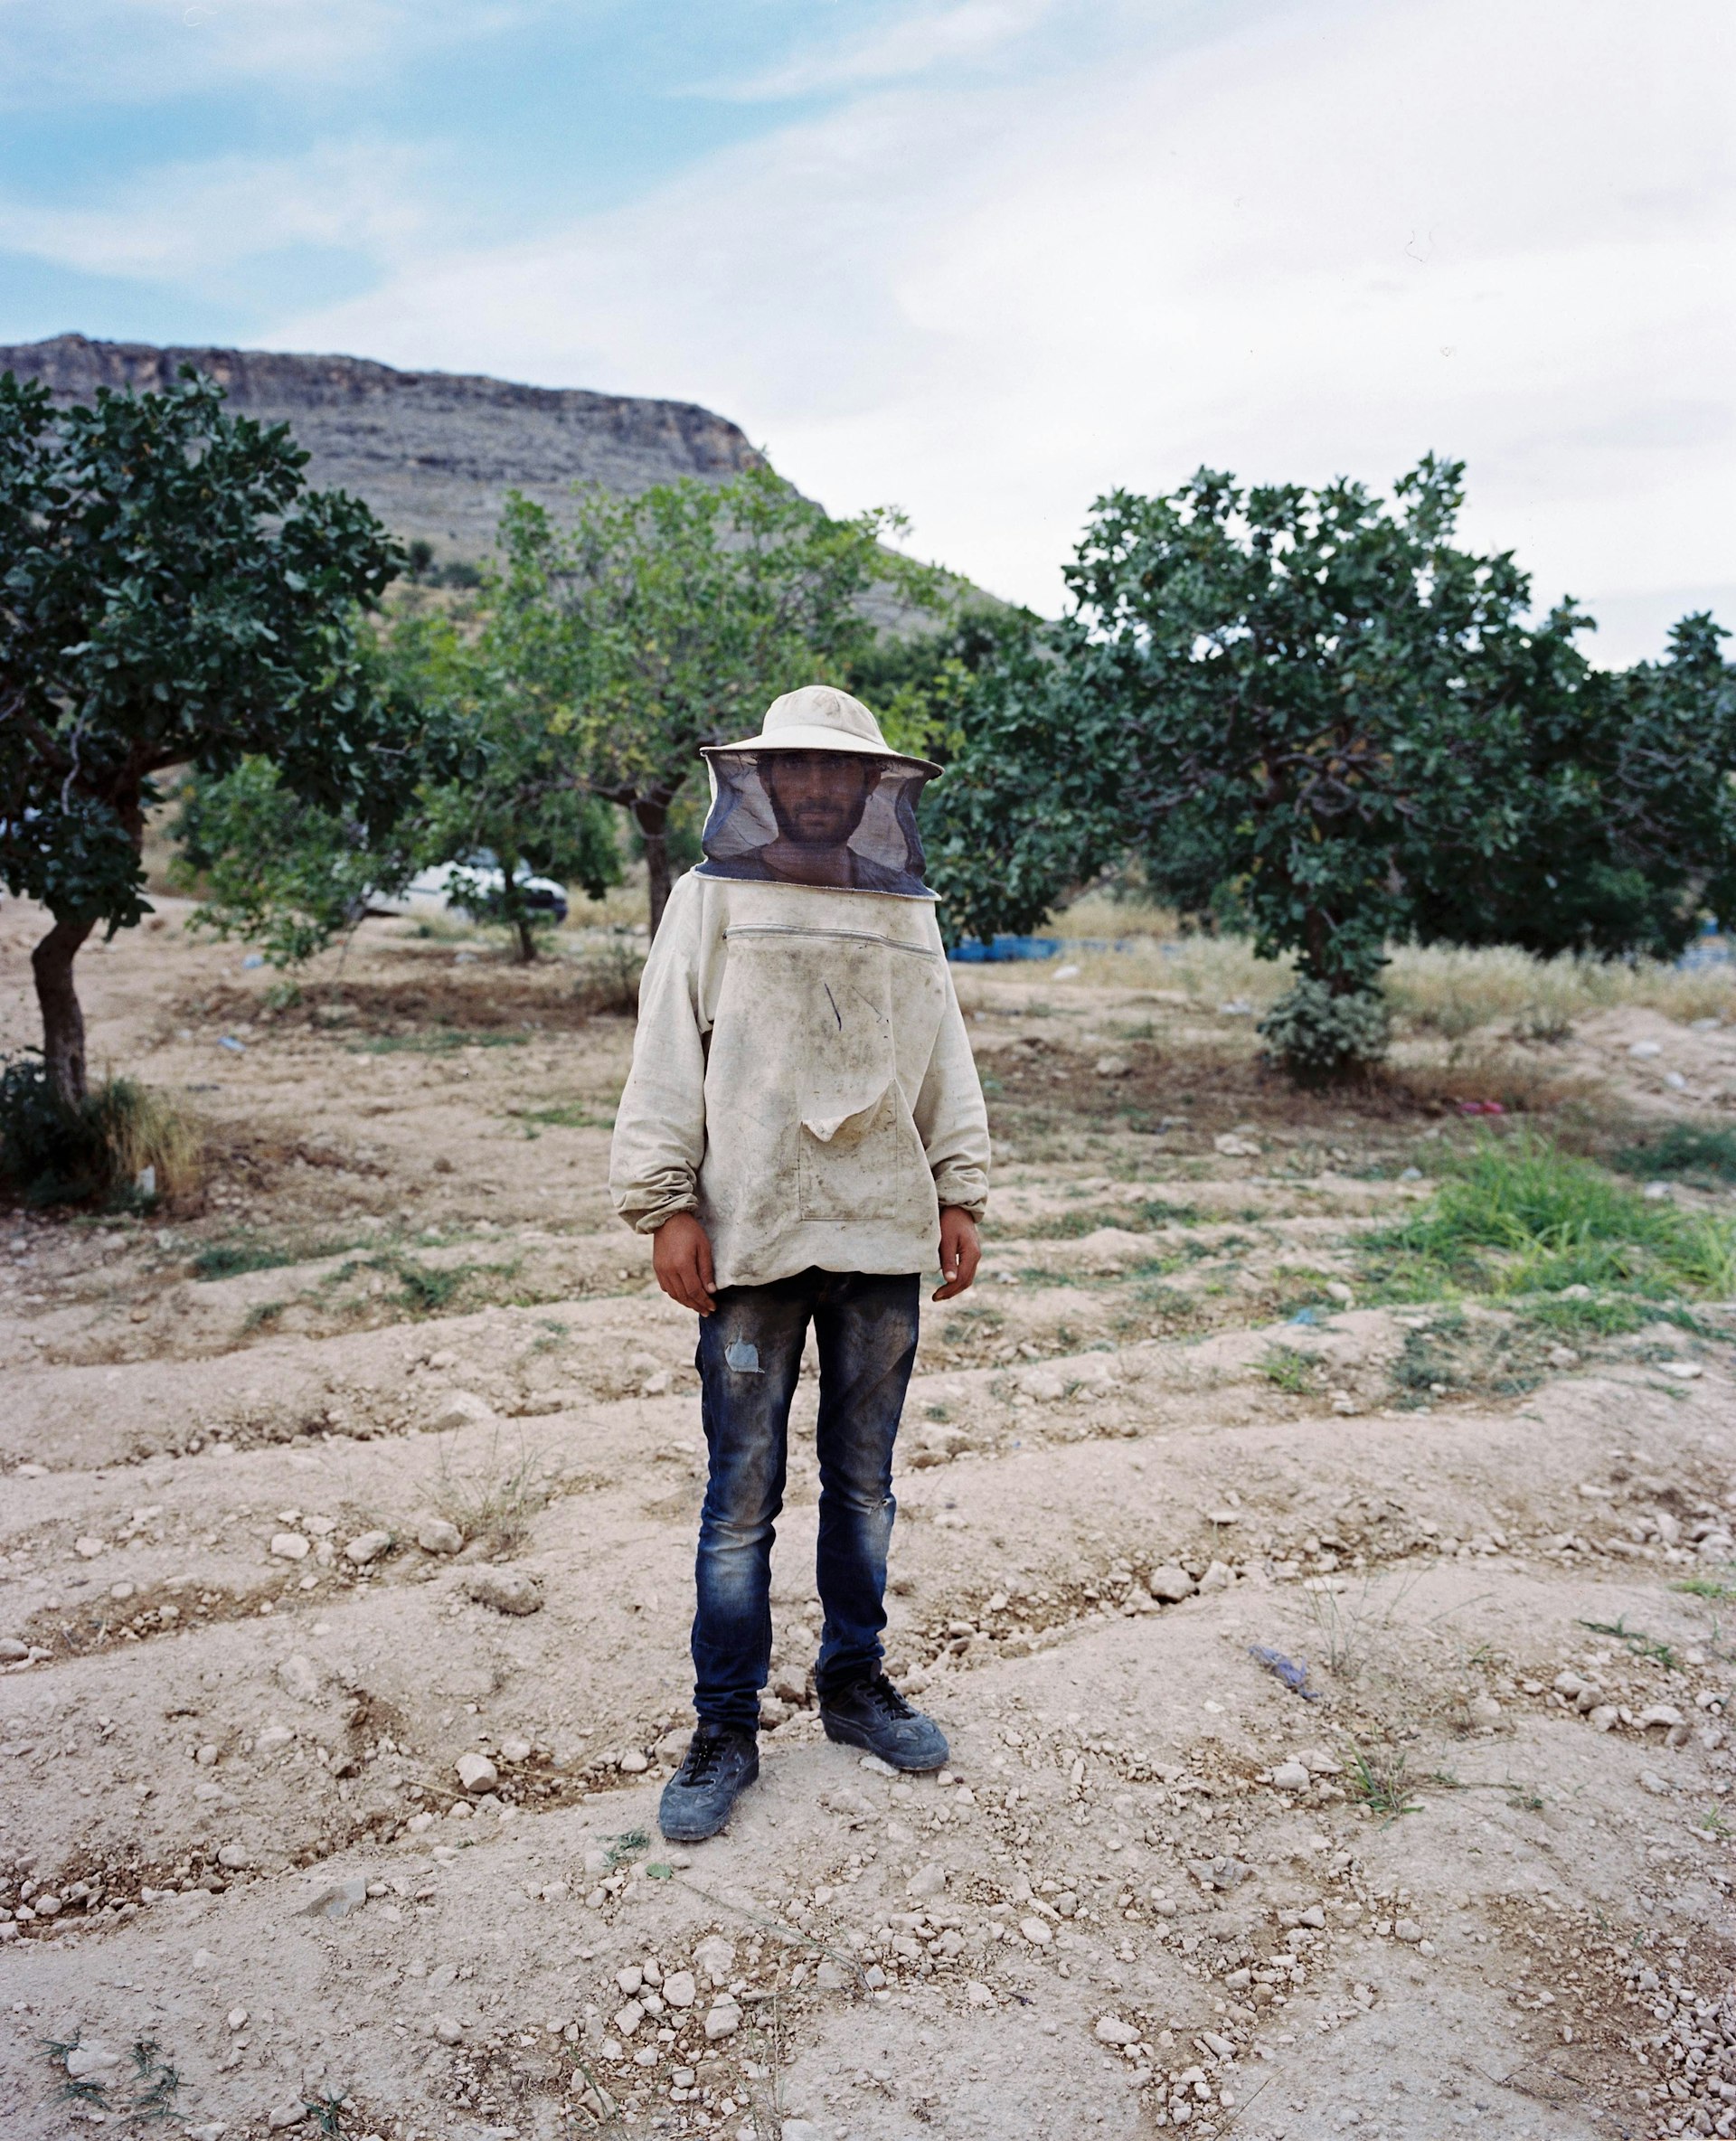  A beekeeper near the town of Halfeti, Turkey, where a flood displaced over 6,000 people in 2000. 